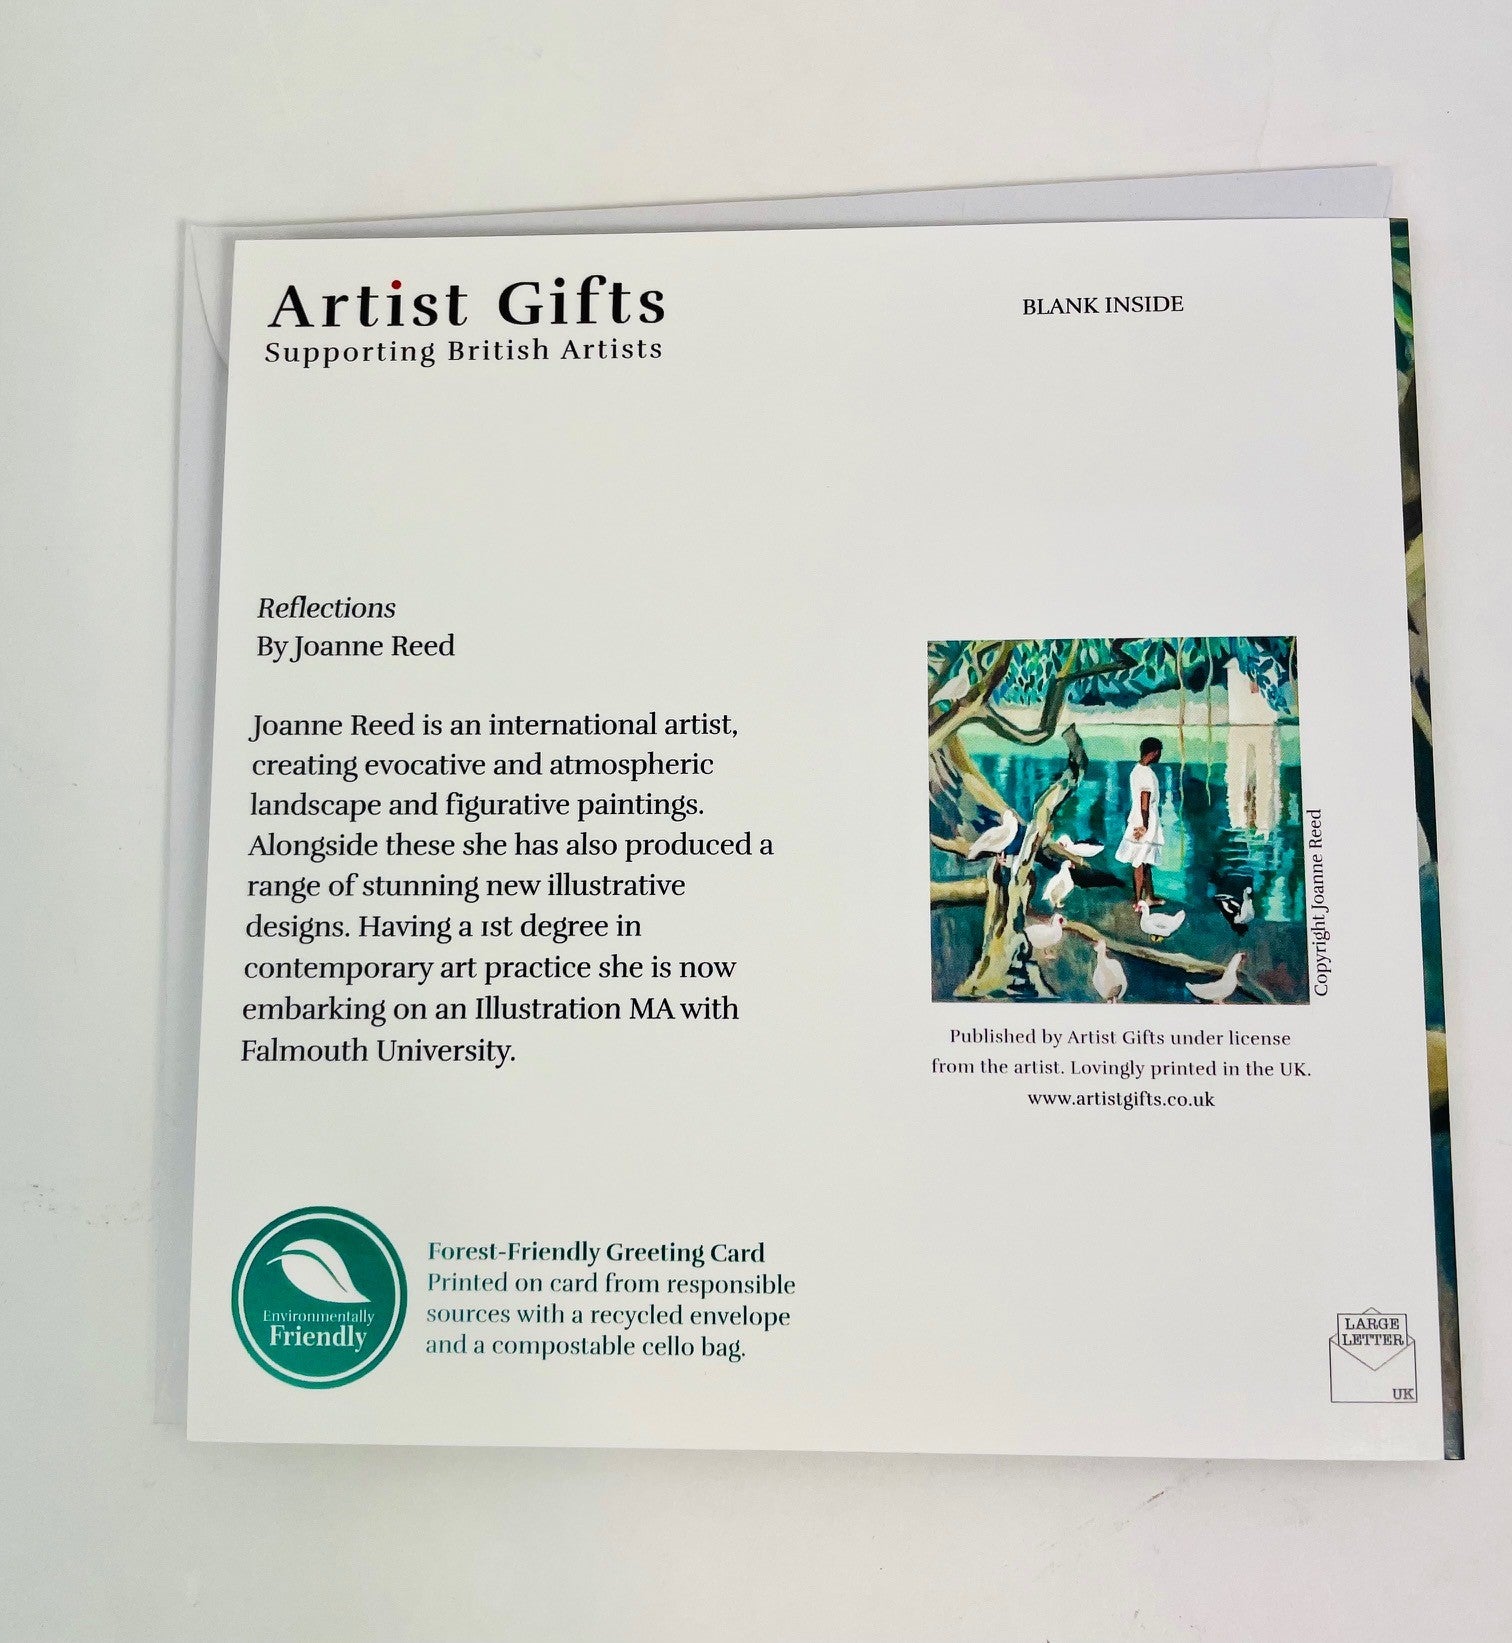 Greetings Card & Coaster by Artists Gifts - Reflections